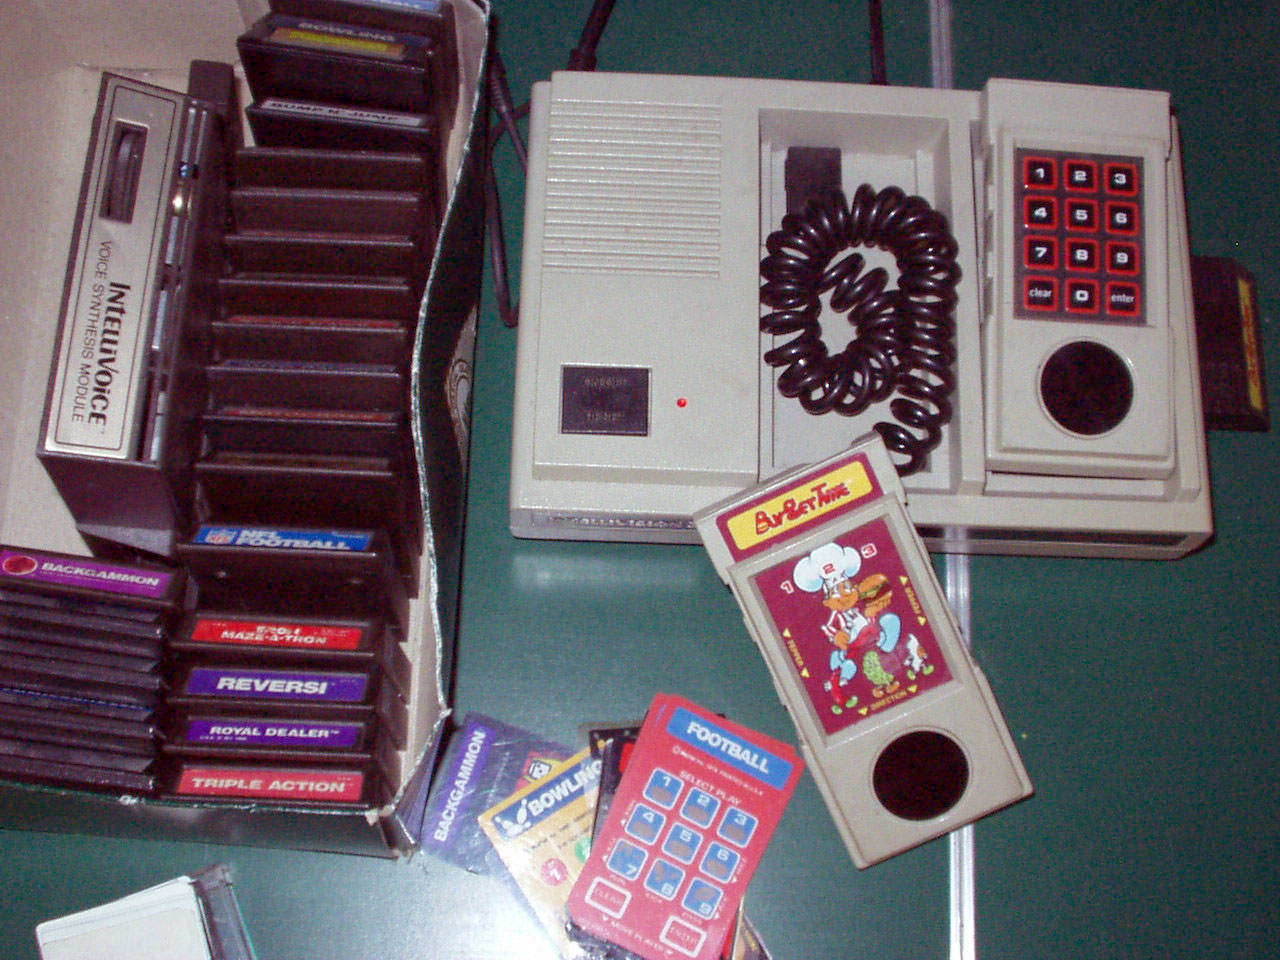 An Intellivision console and a copy of "BurgerTime"